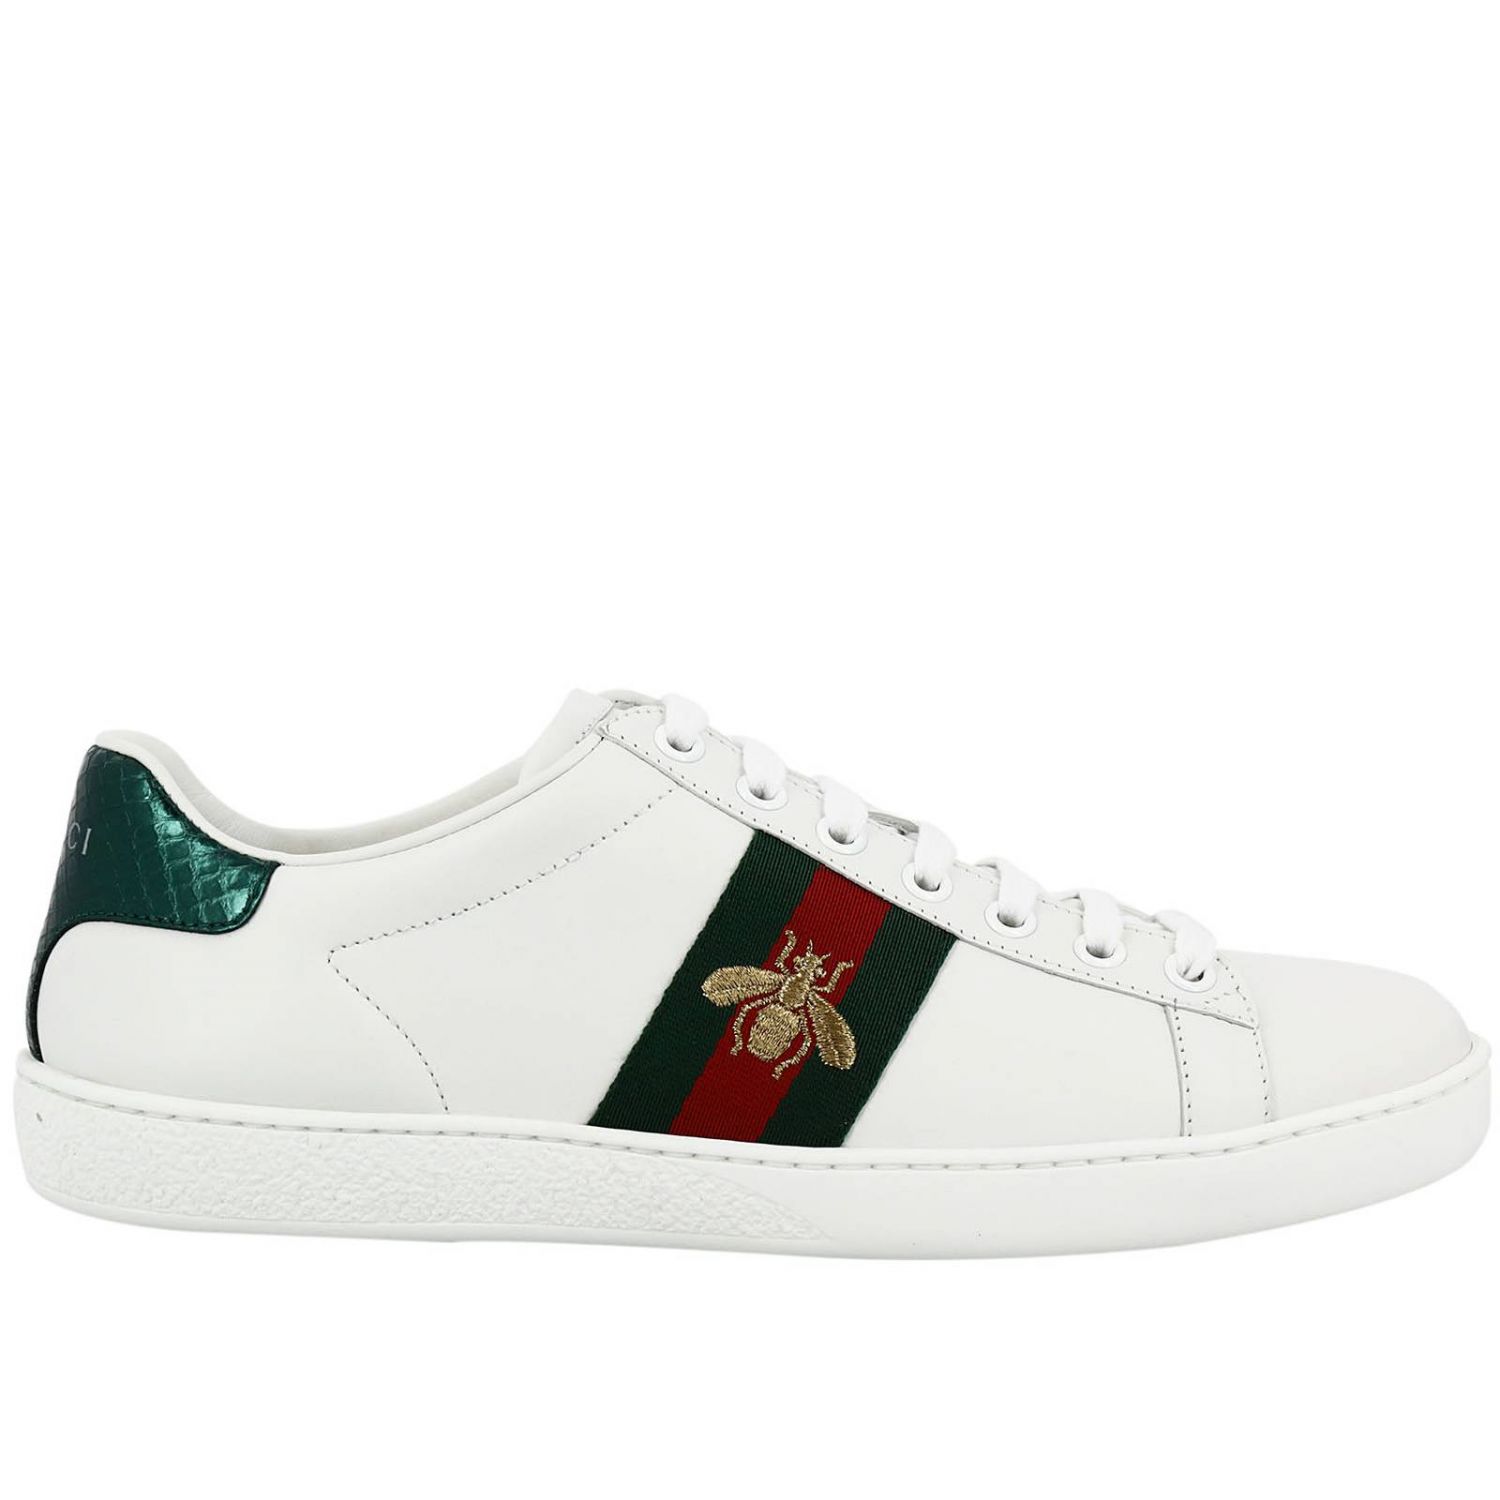 GUCCI: Shoes women - White | Gucci sneakers 431942 A38G0 online at ...